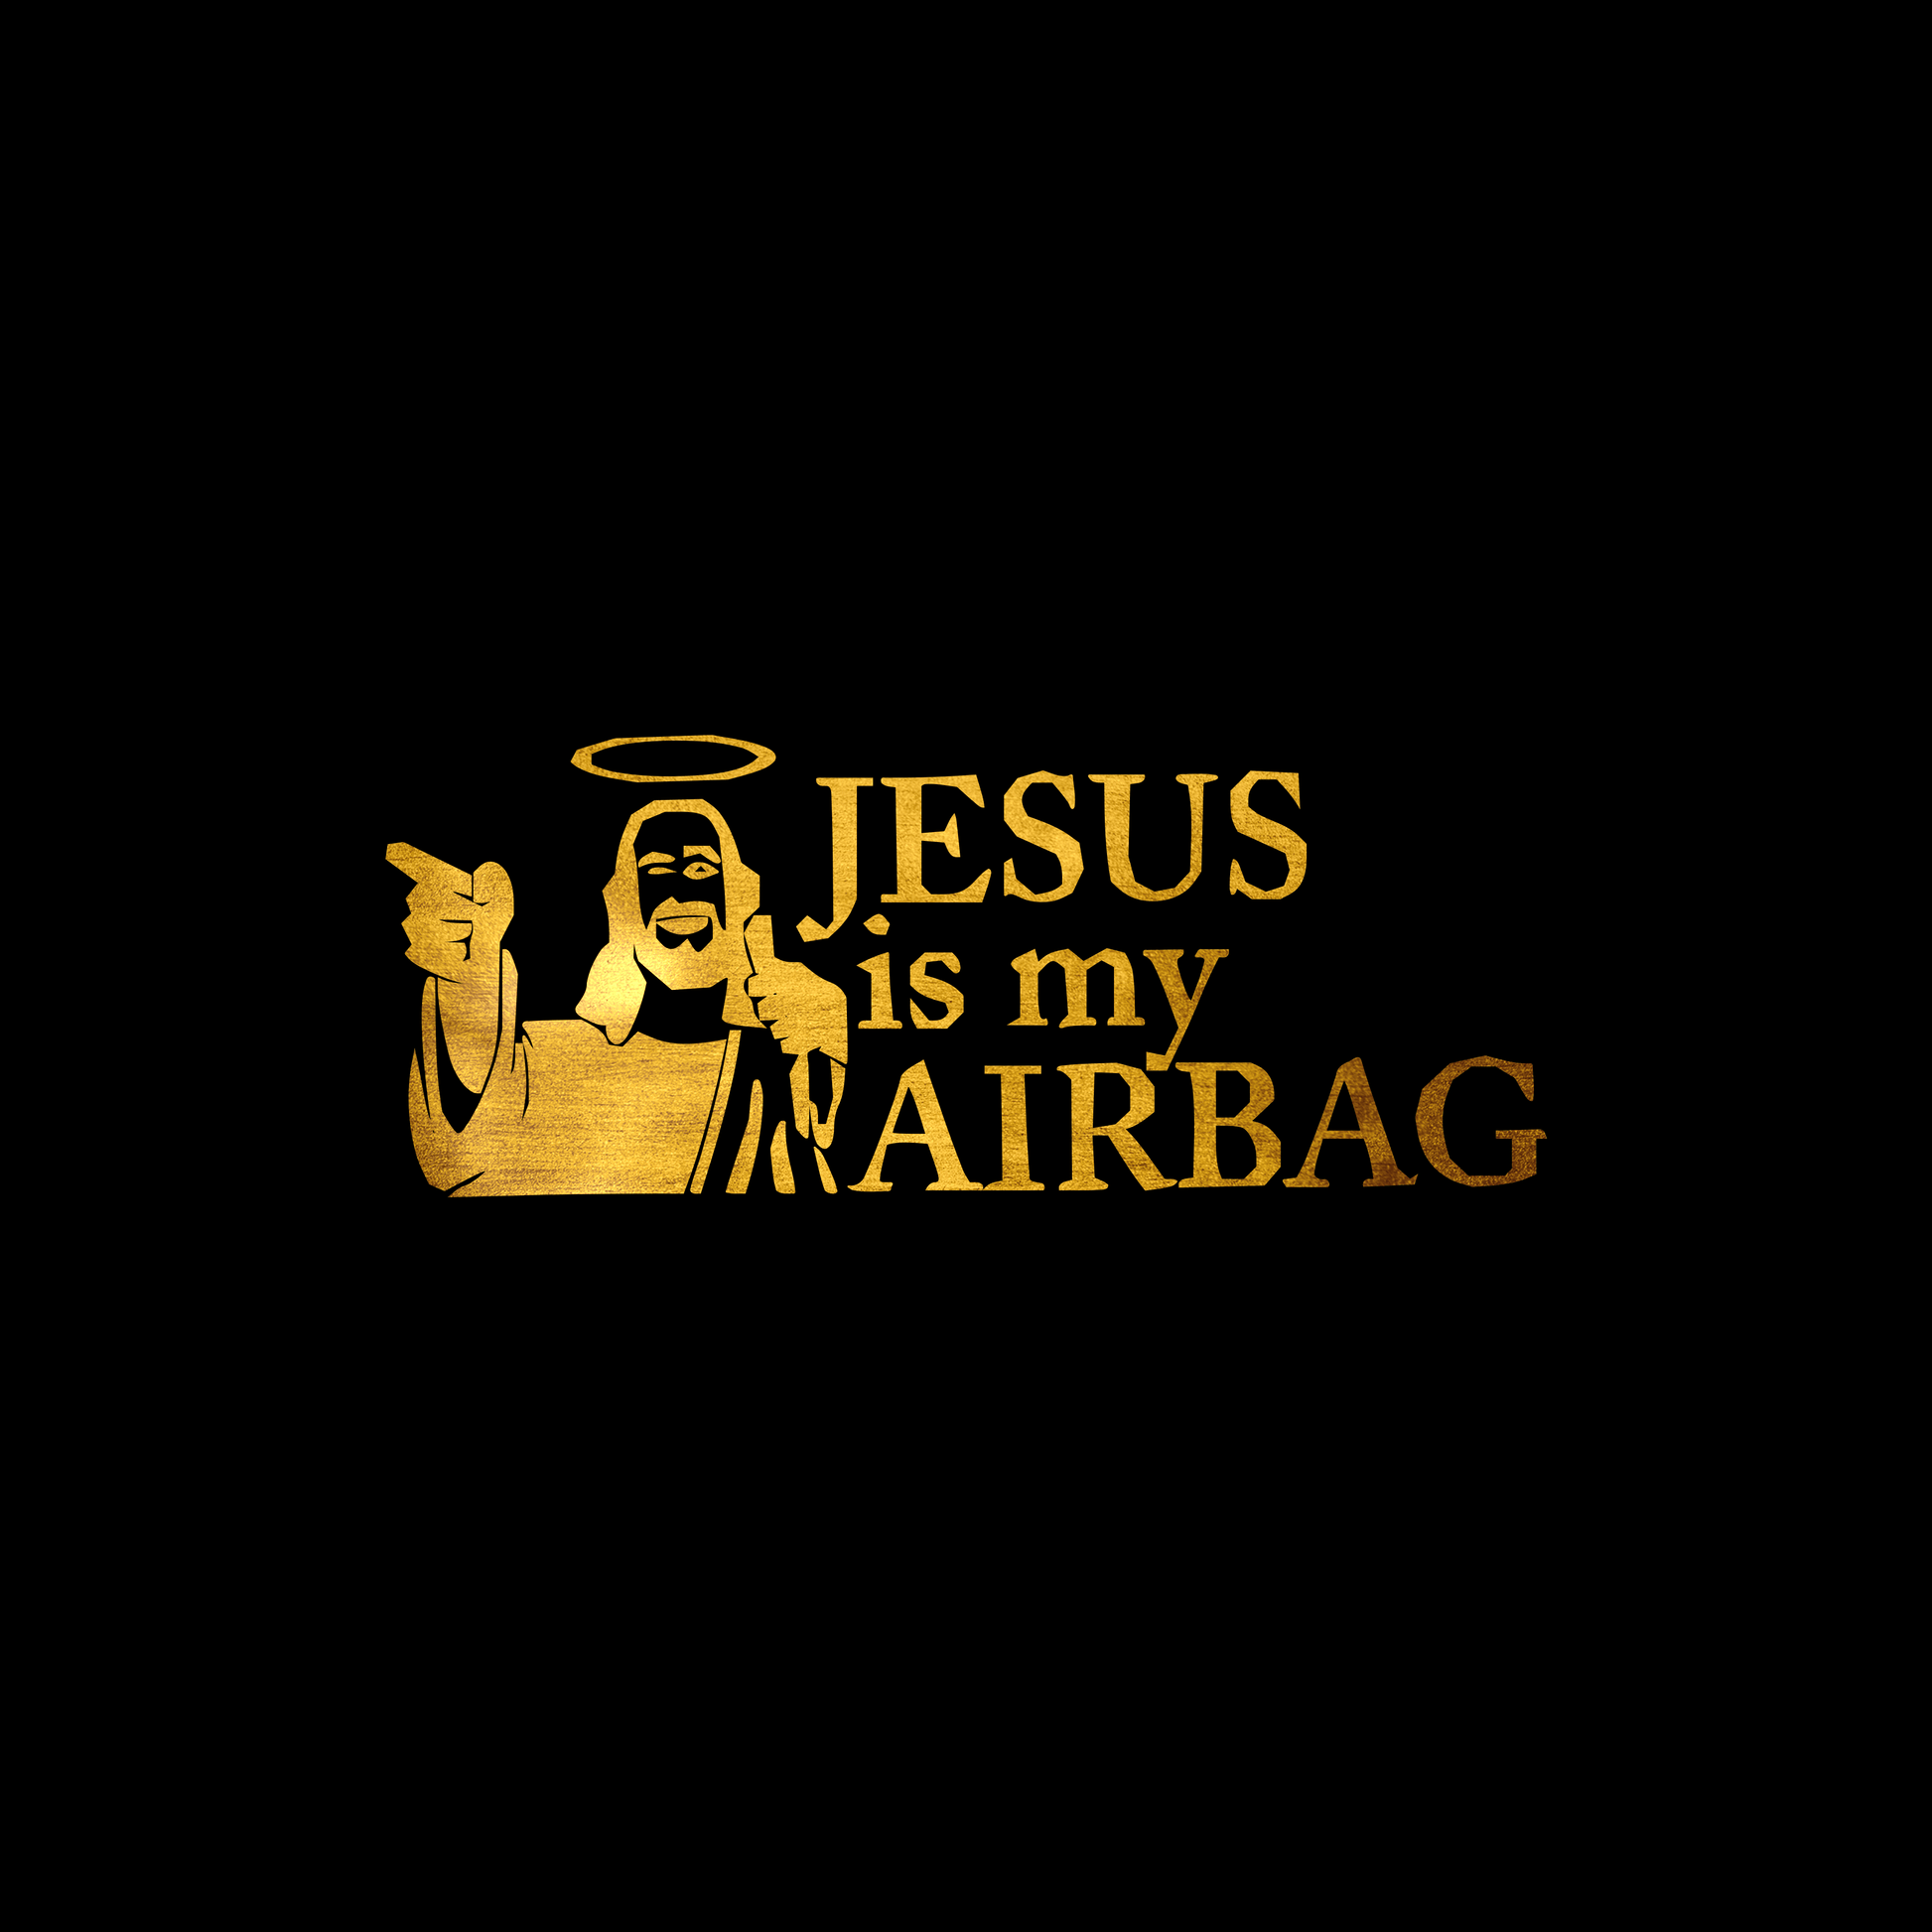 Jesus is my airbag sticker decal